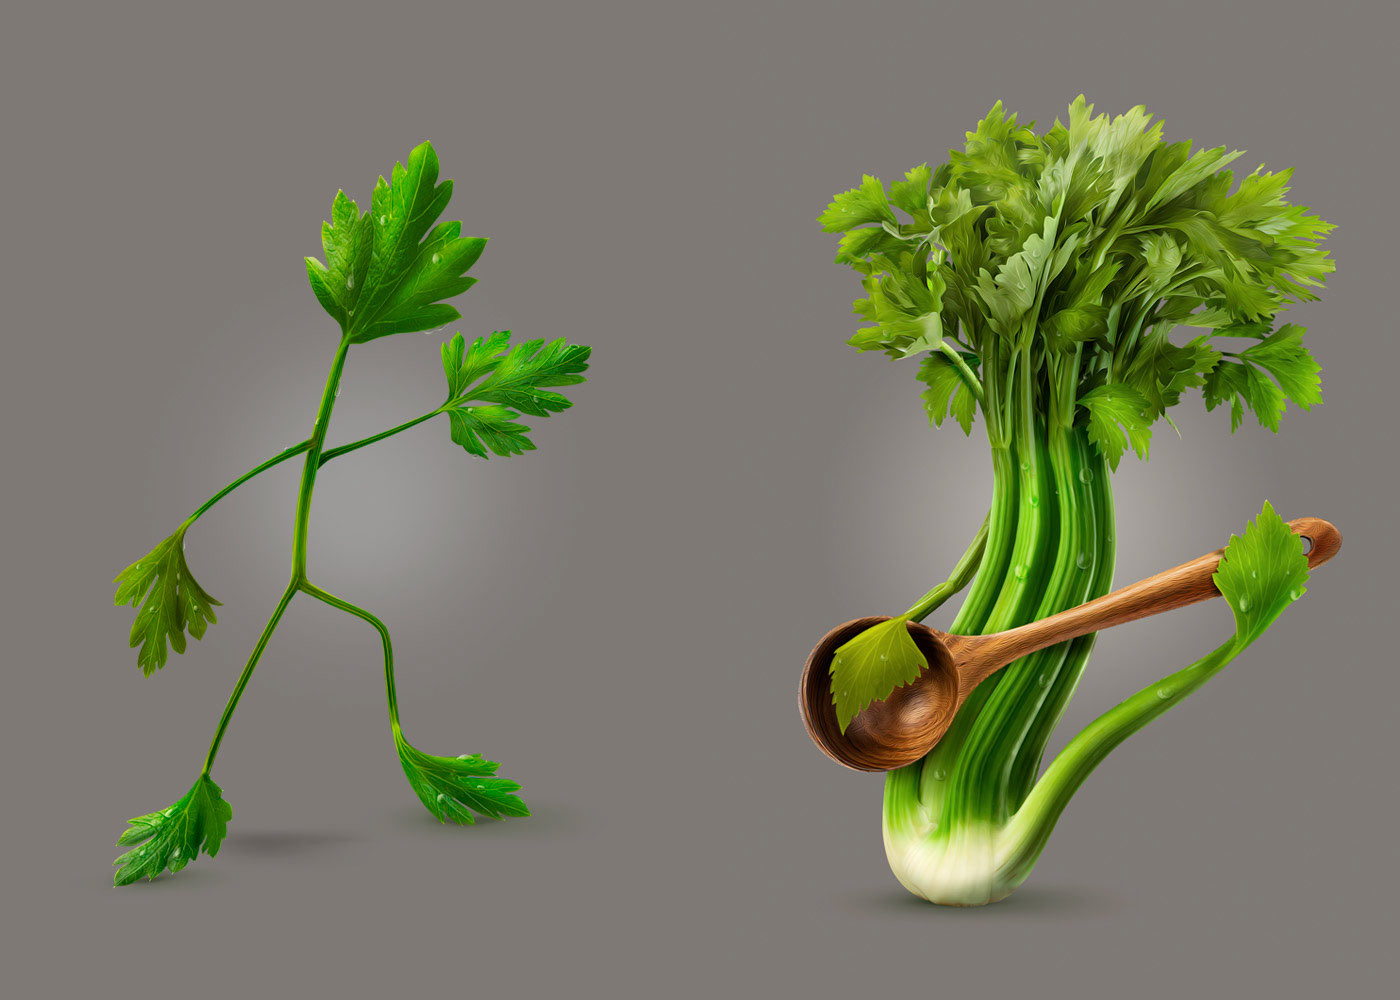 Character design  photoshop retouch vegetables seasonings kitchen